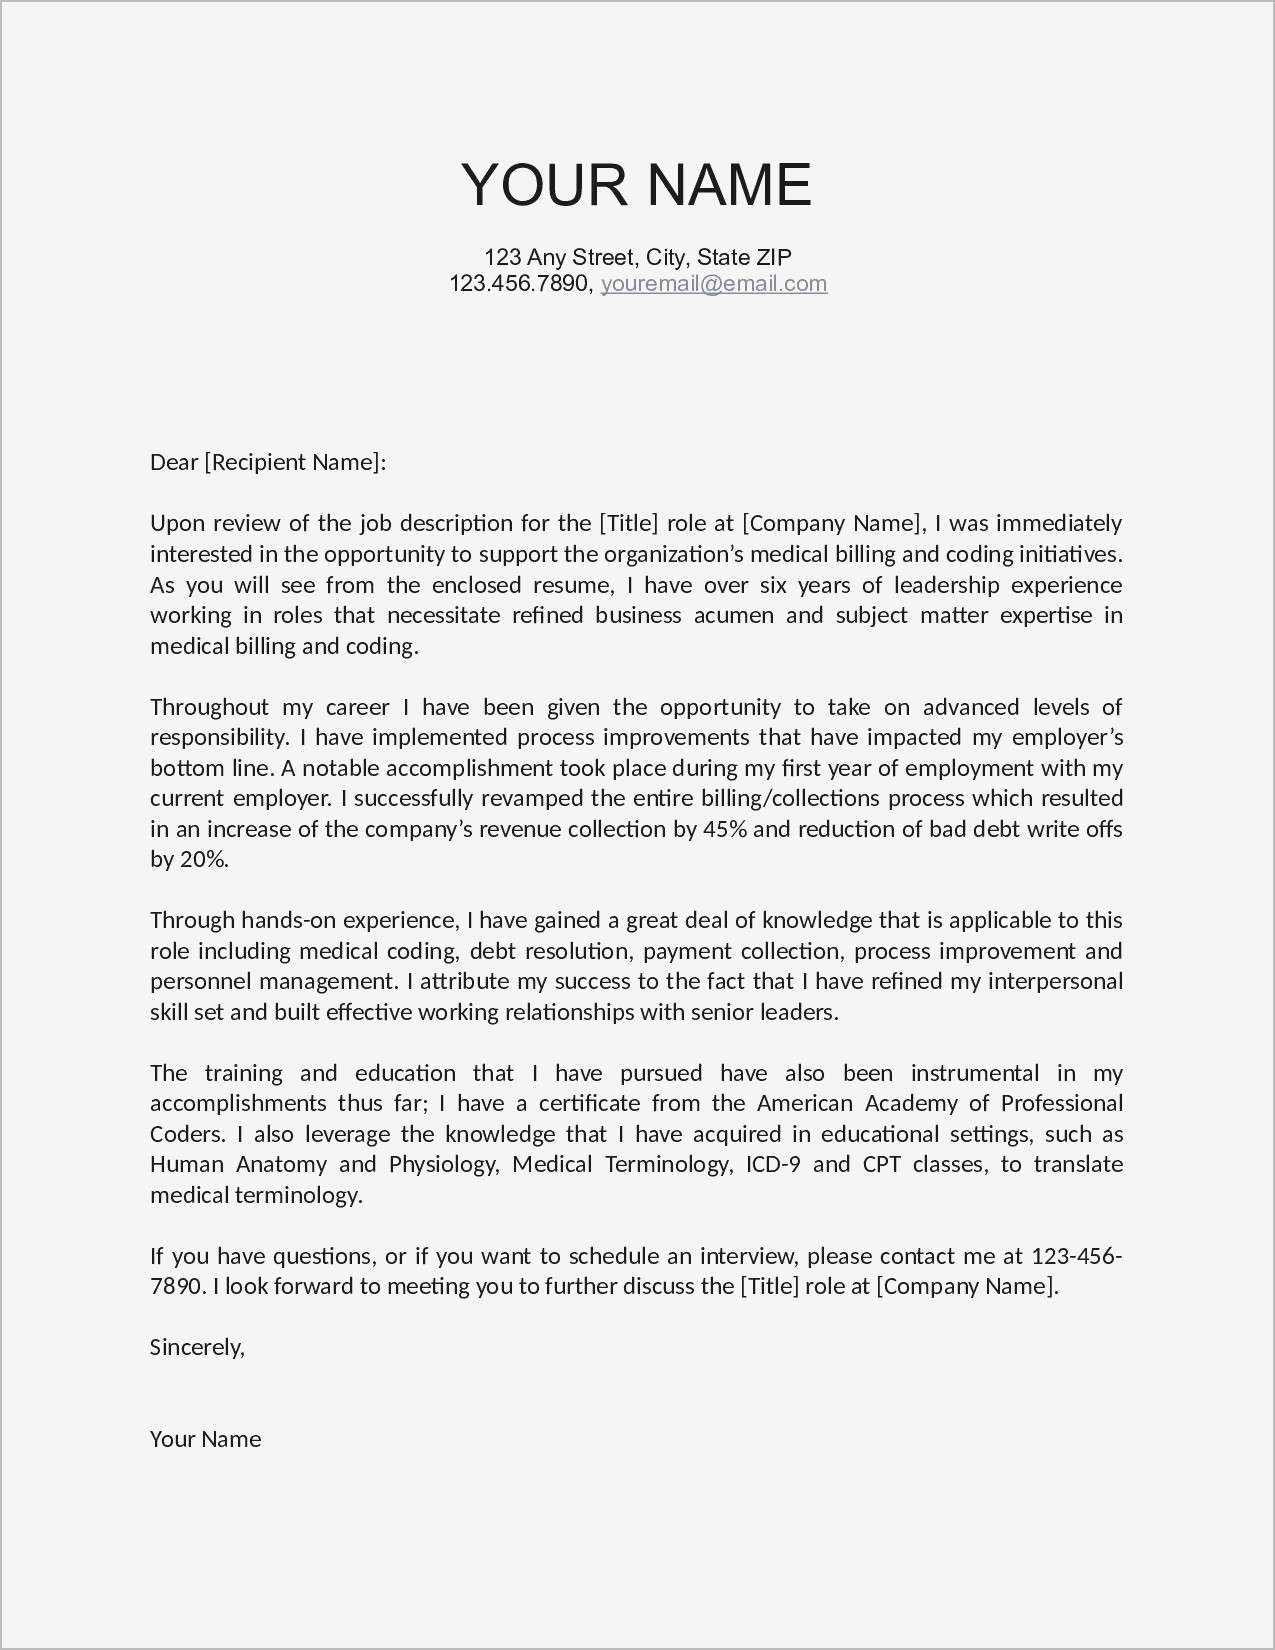 Pdf Cover Letter Template - Cover Letter for Employment Pdf format